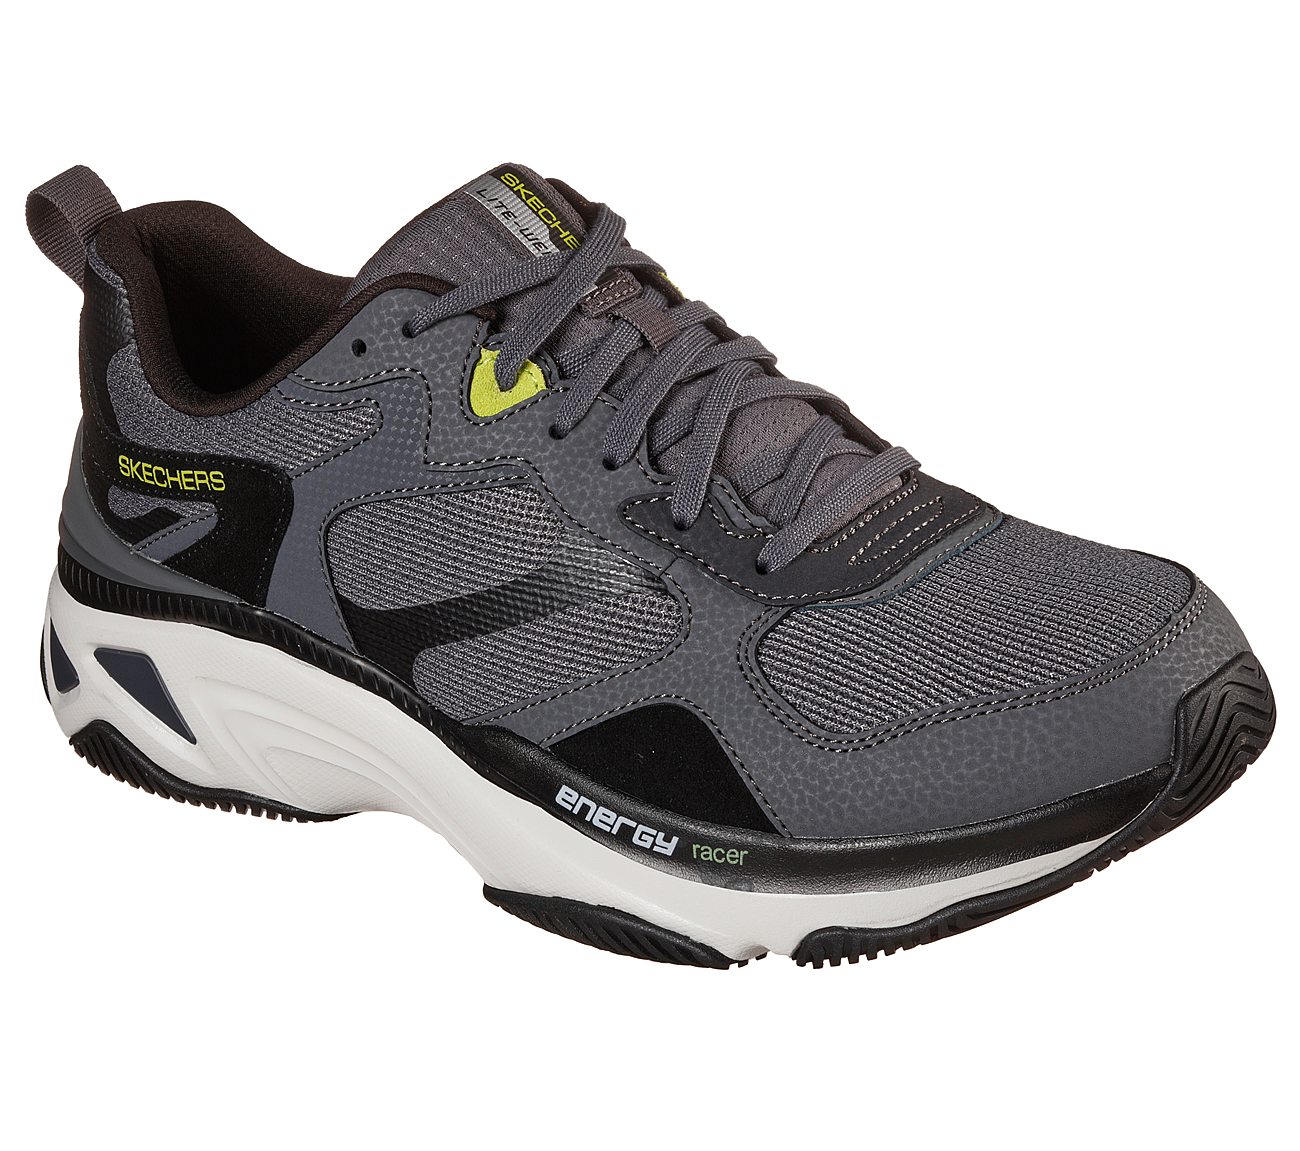 ENERGY RACER-LINDORA, CHARCOAL/BLACK Footwear Lateral View